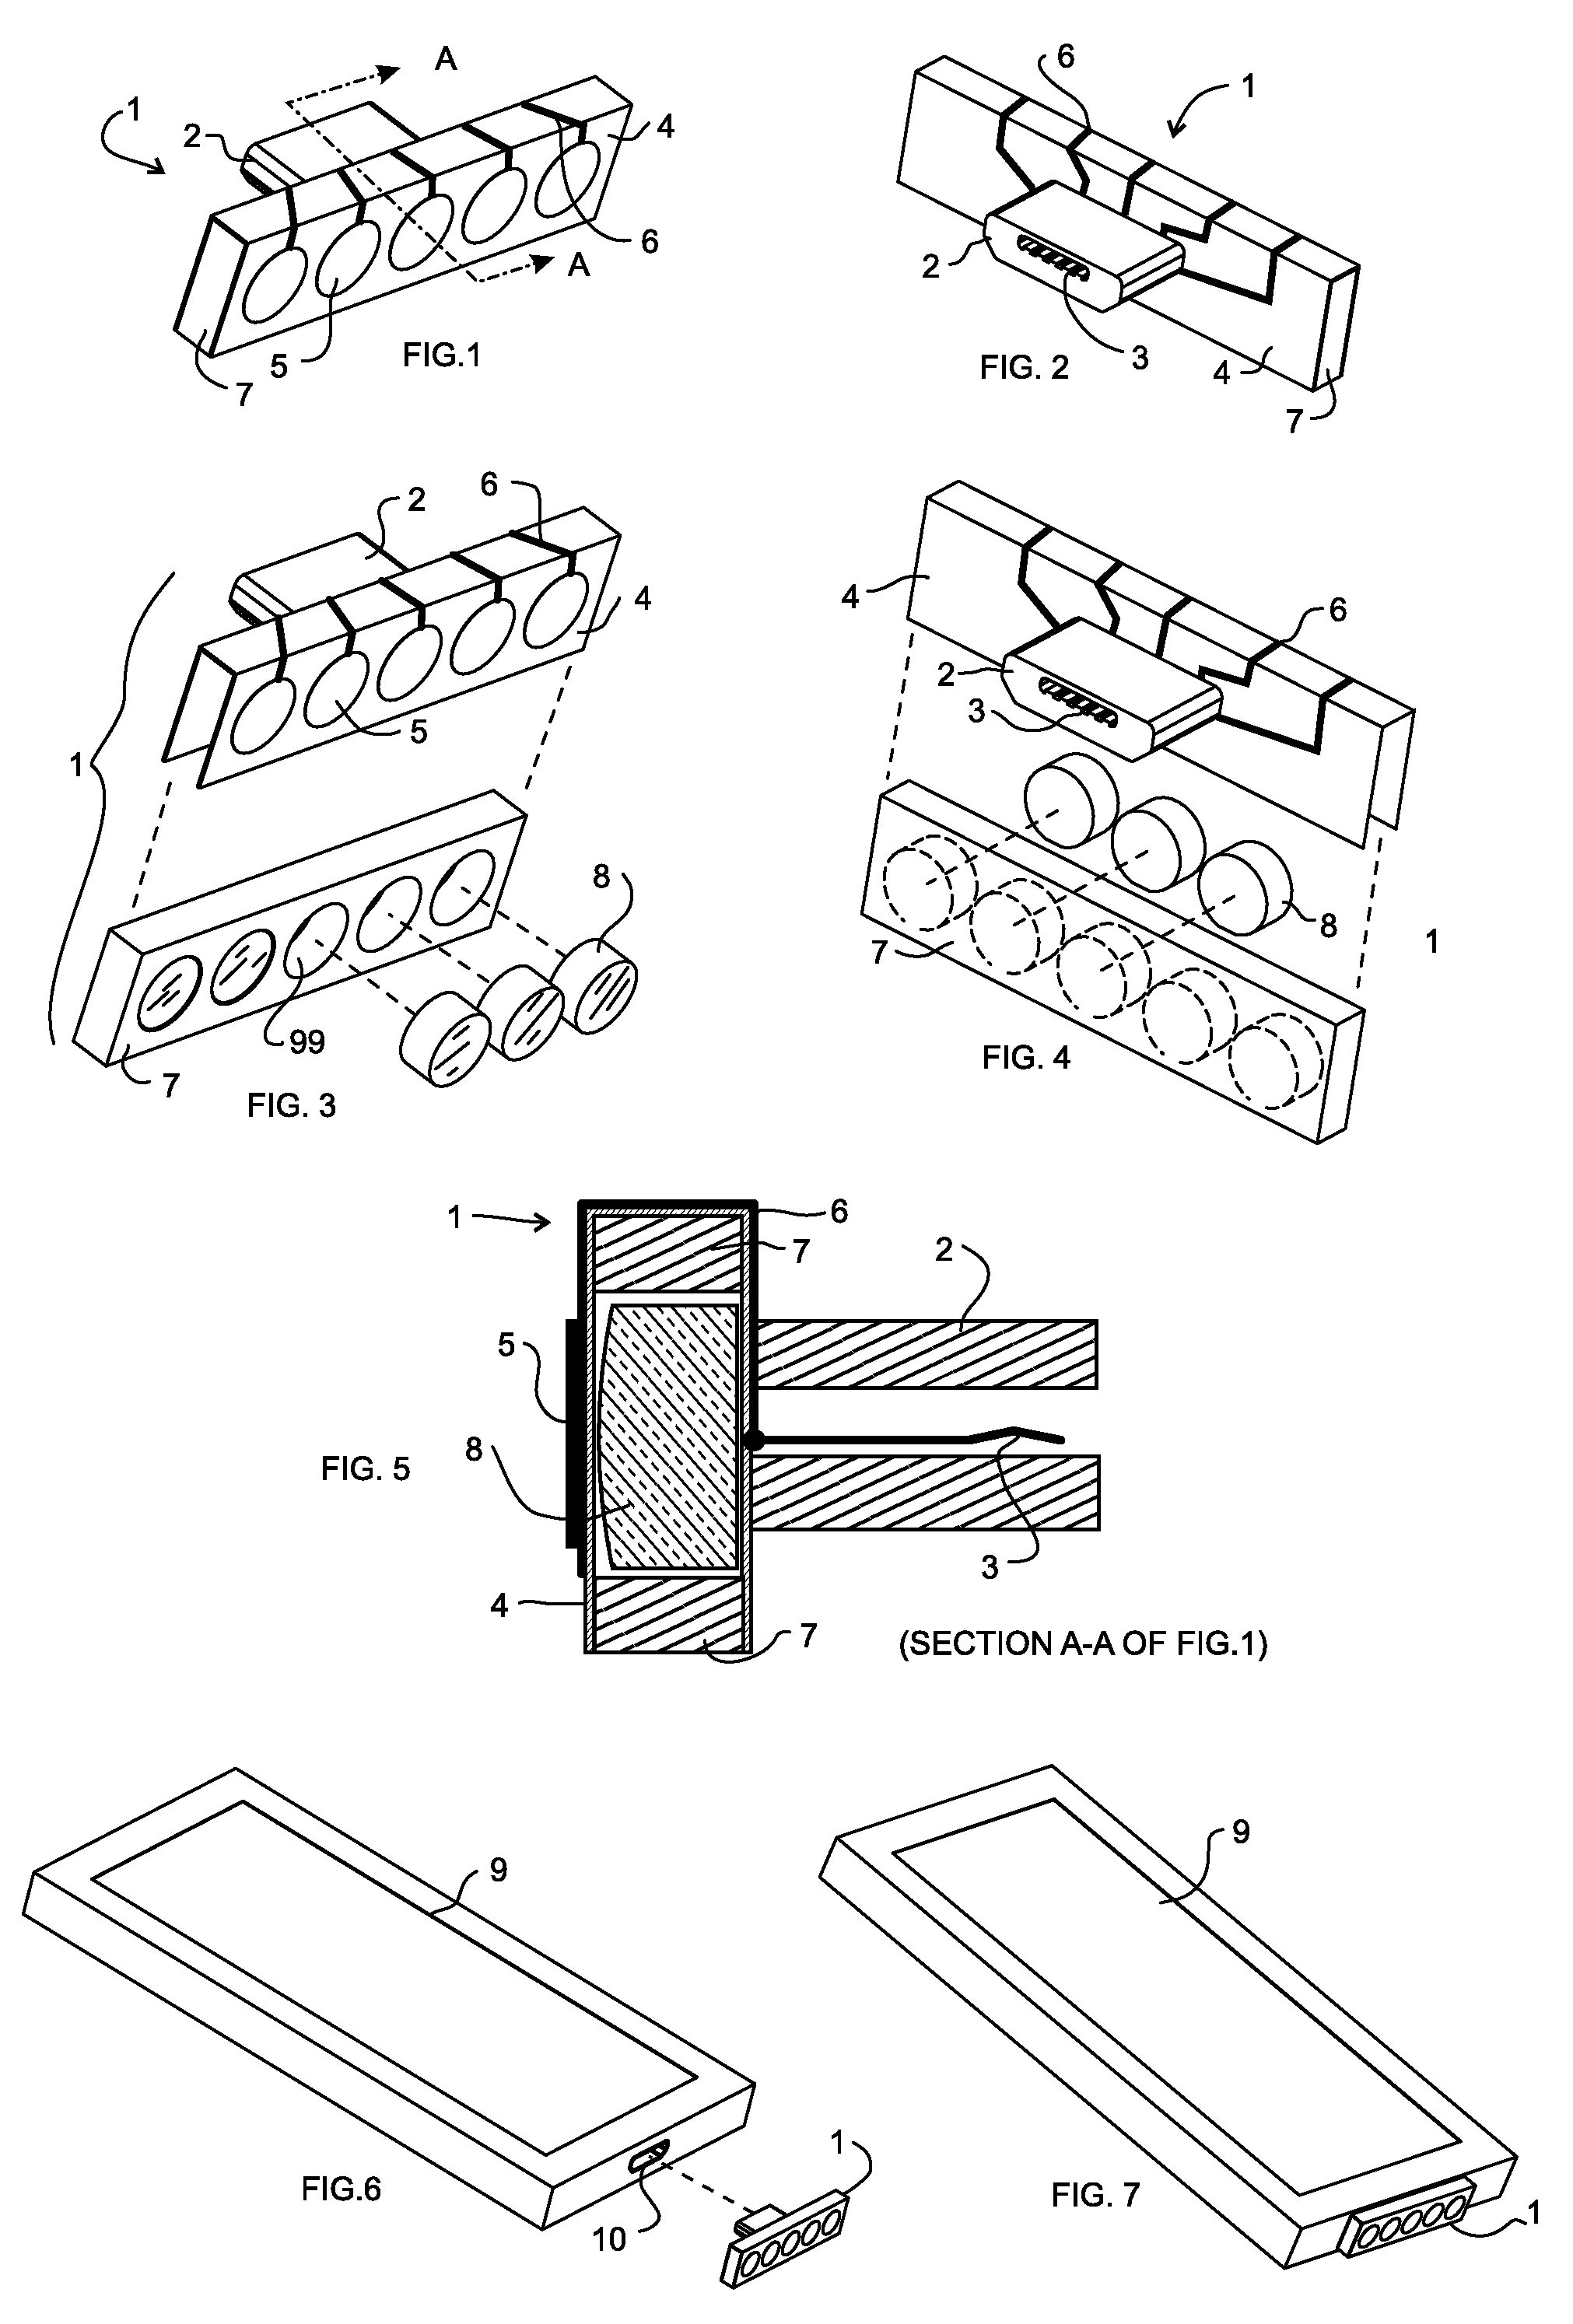 Interposer connectors with magnetic components